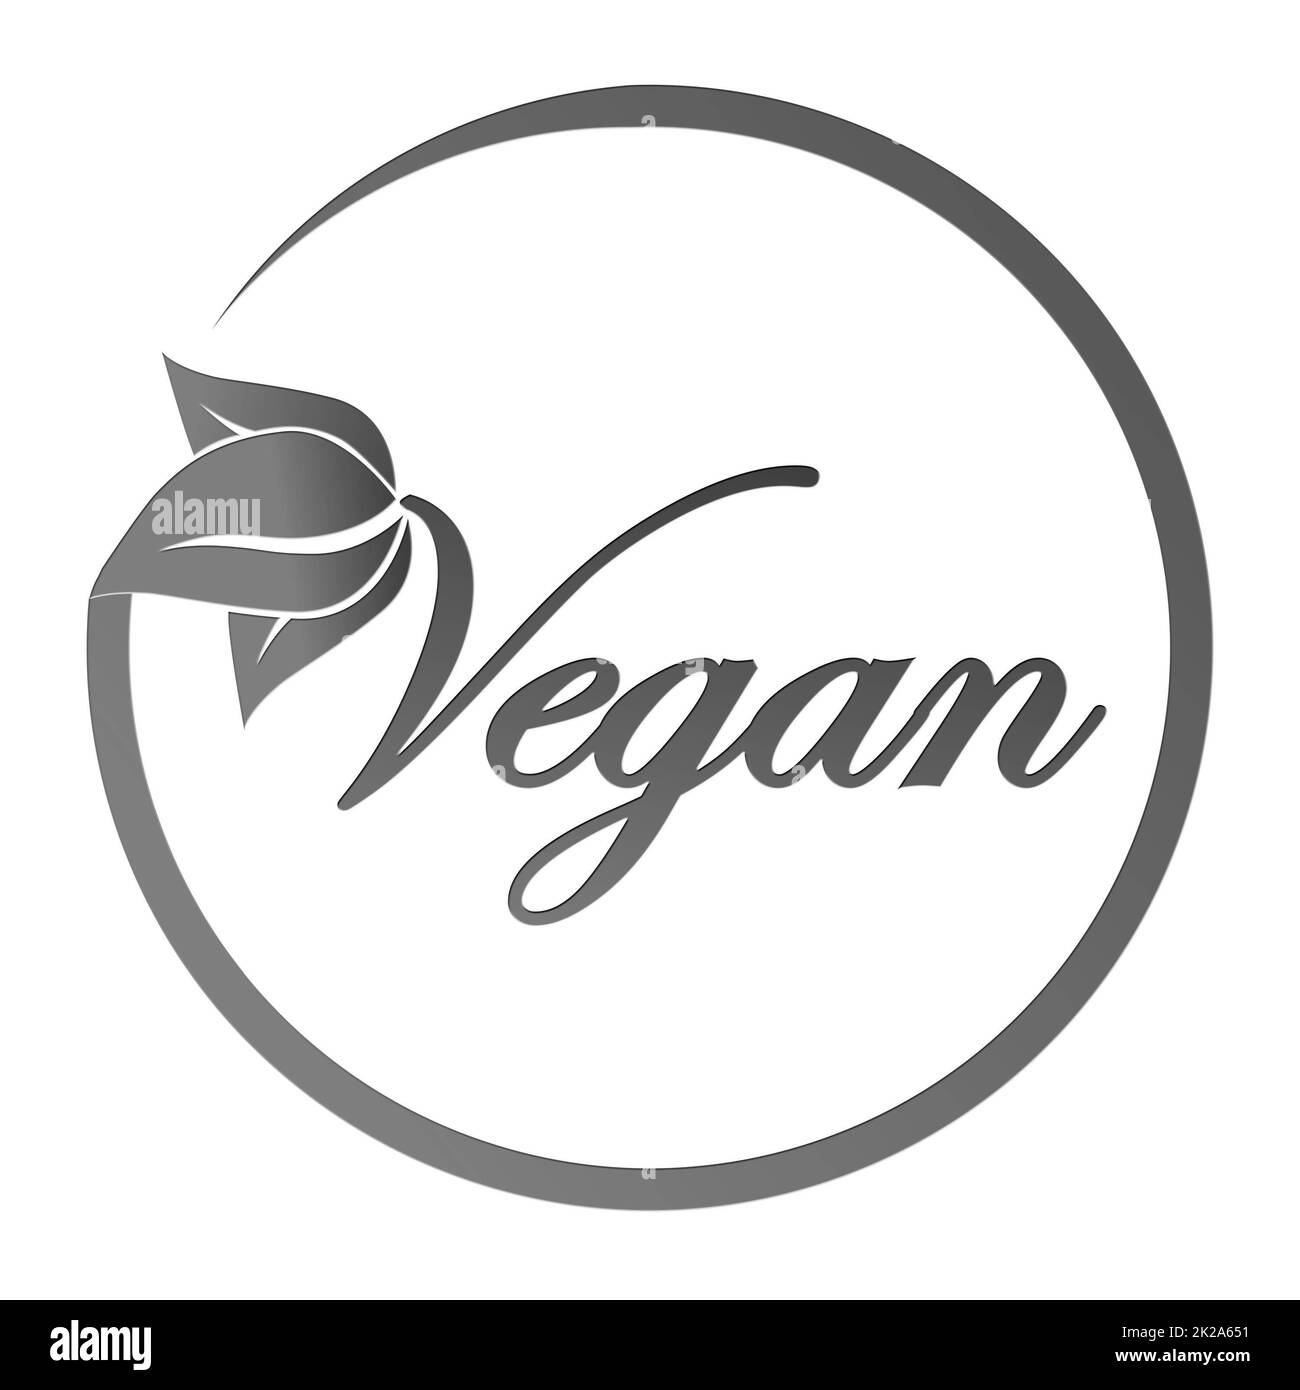 Text Logo Vegan Concept - Vegan food diet icon - Gray lettering in trendy style with leaf plant elements and frame - isolated on white background Stock Photo